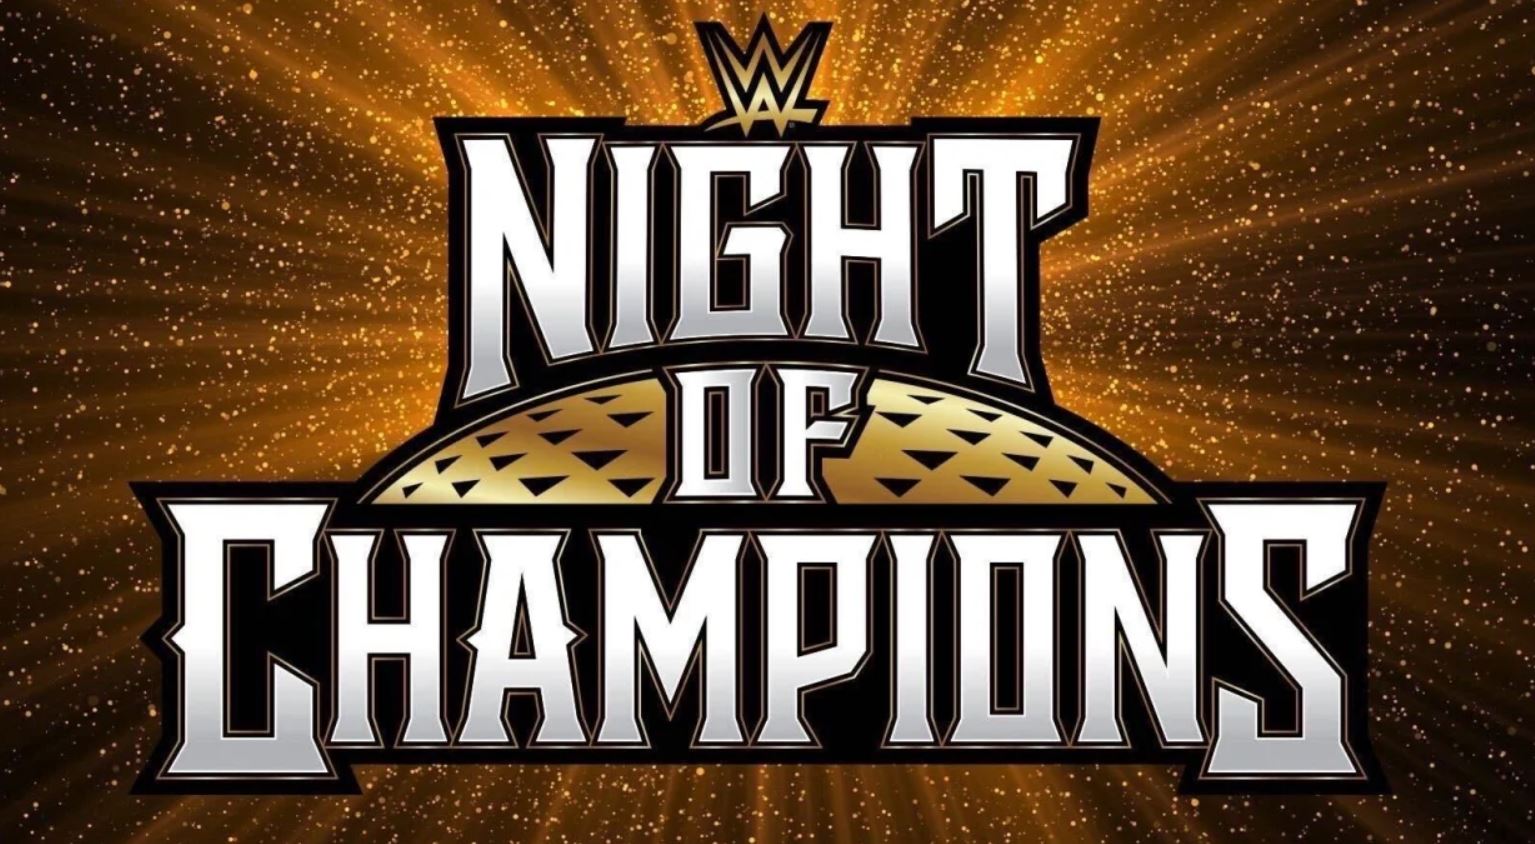 WWE Night of Champions Main Event for New World Heavyweight Title Revealed, Updated Card